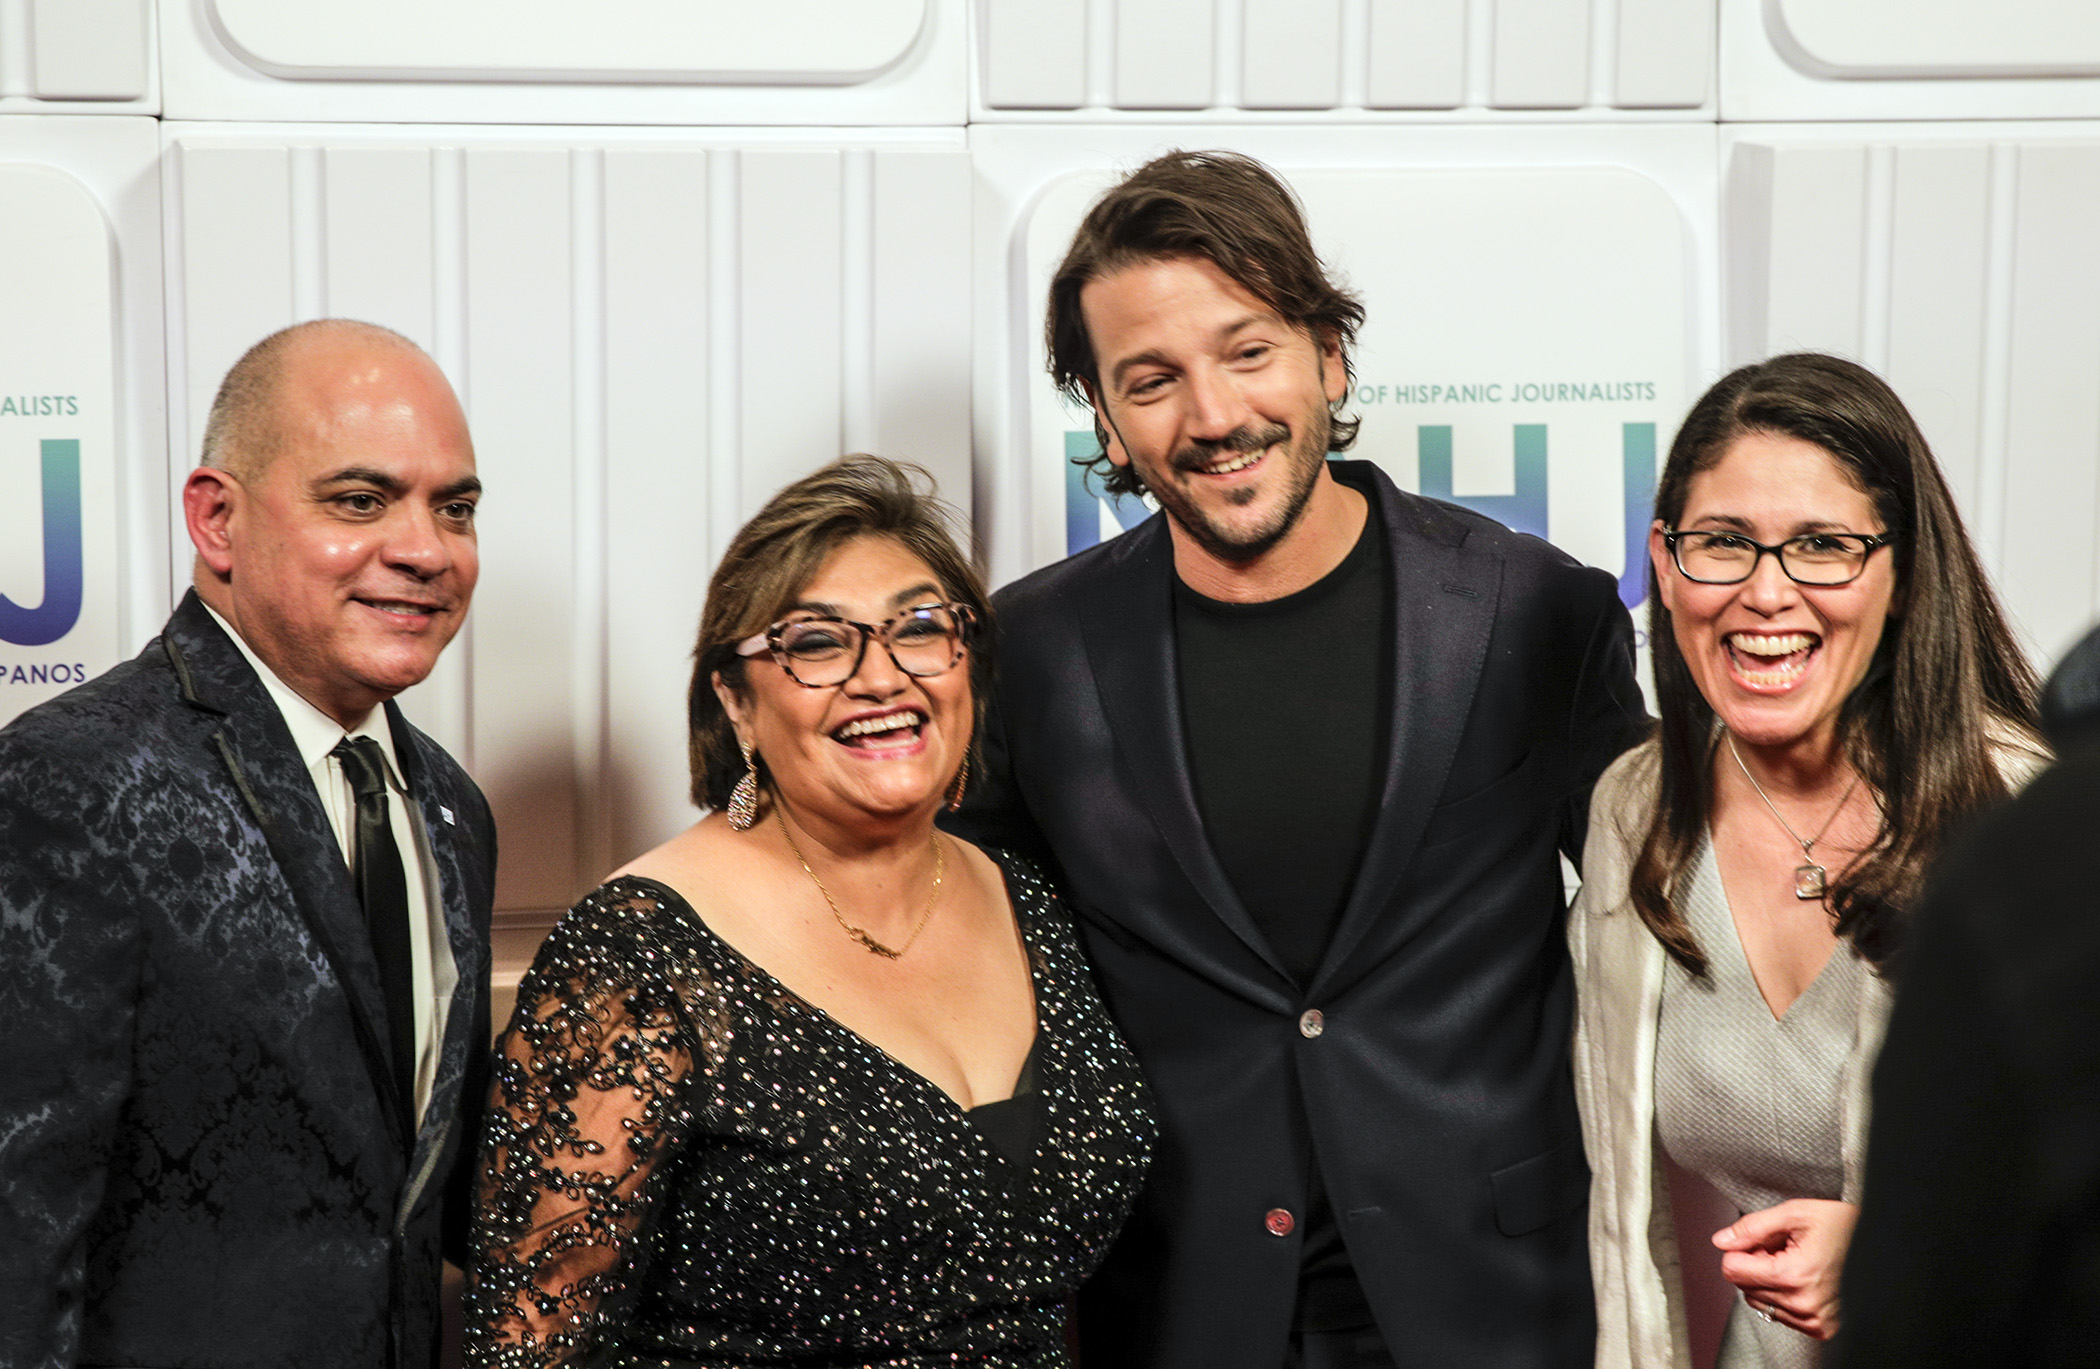 (L-R) National Association of Hispanic Journalists Executive Director David Peña, President Nora López, actor Diego Luna, and newly elected President Yvette Cabrera.